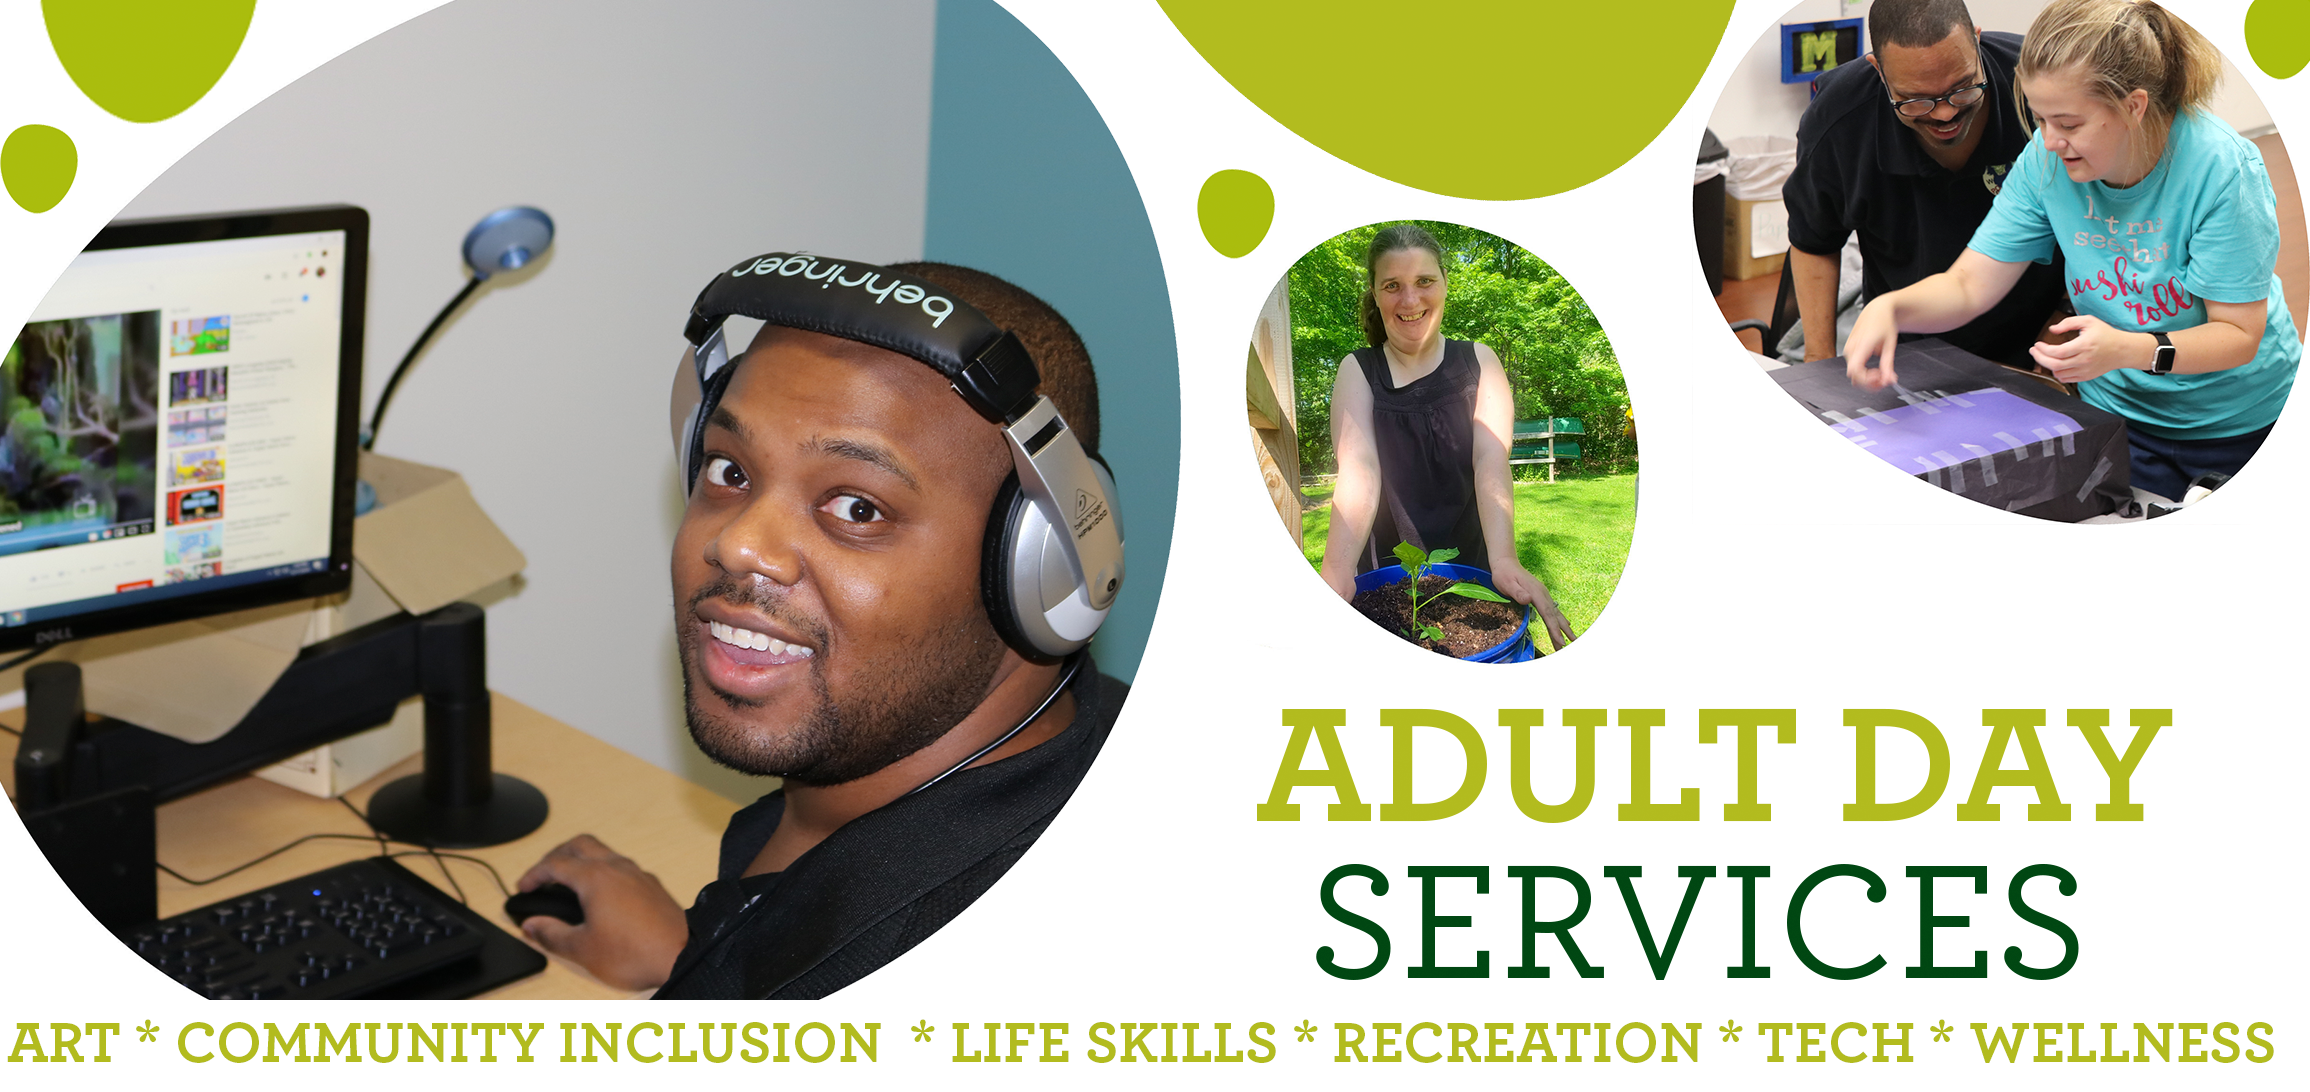 Stepping Stones Adult Day Services program for individuals with disabilities operates at three Greater Cincinnati locations.